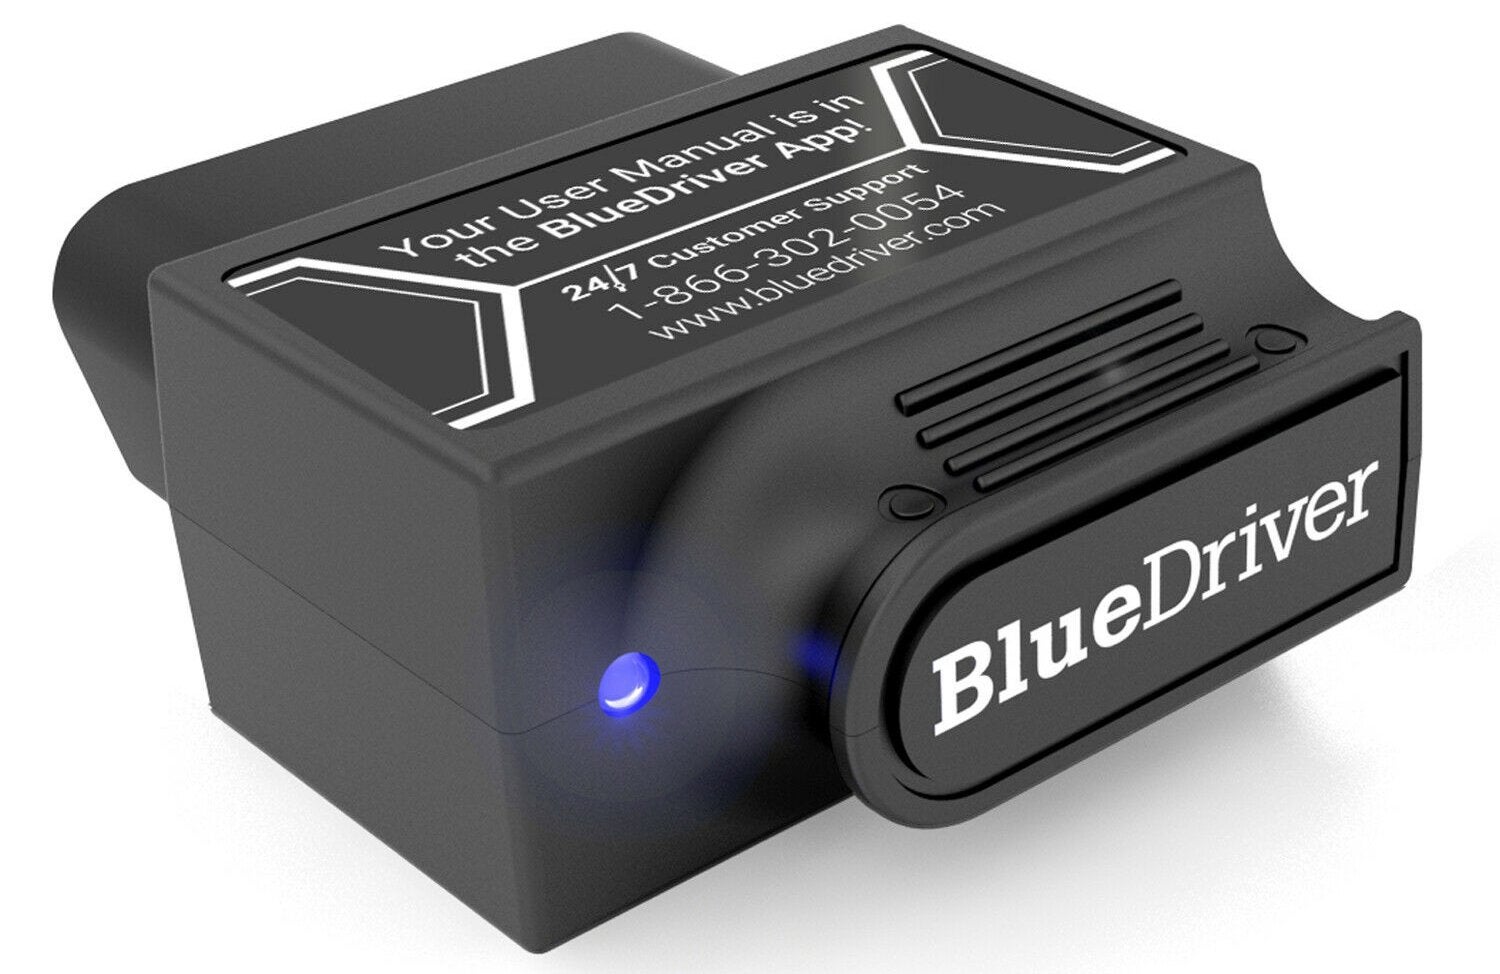 What is the Best Jeep OBD2 Scanner? | Jeep Wrangler Forum